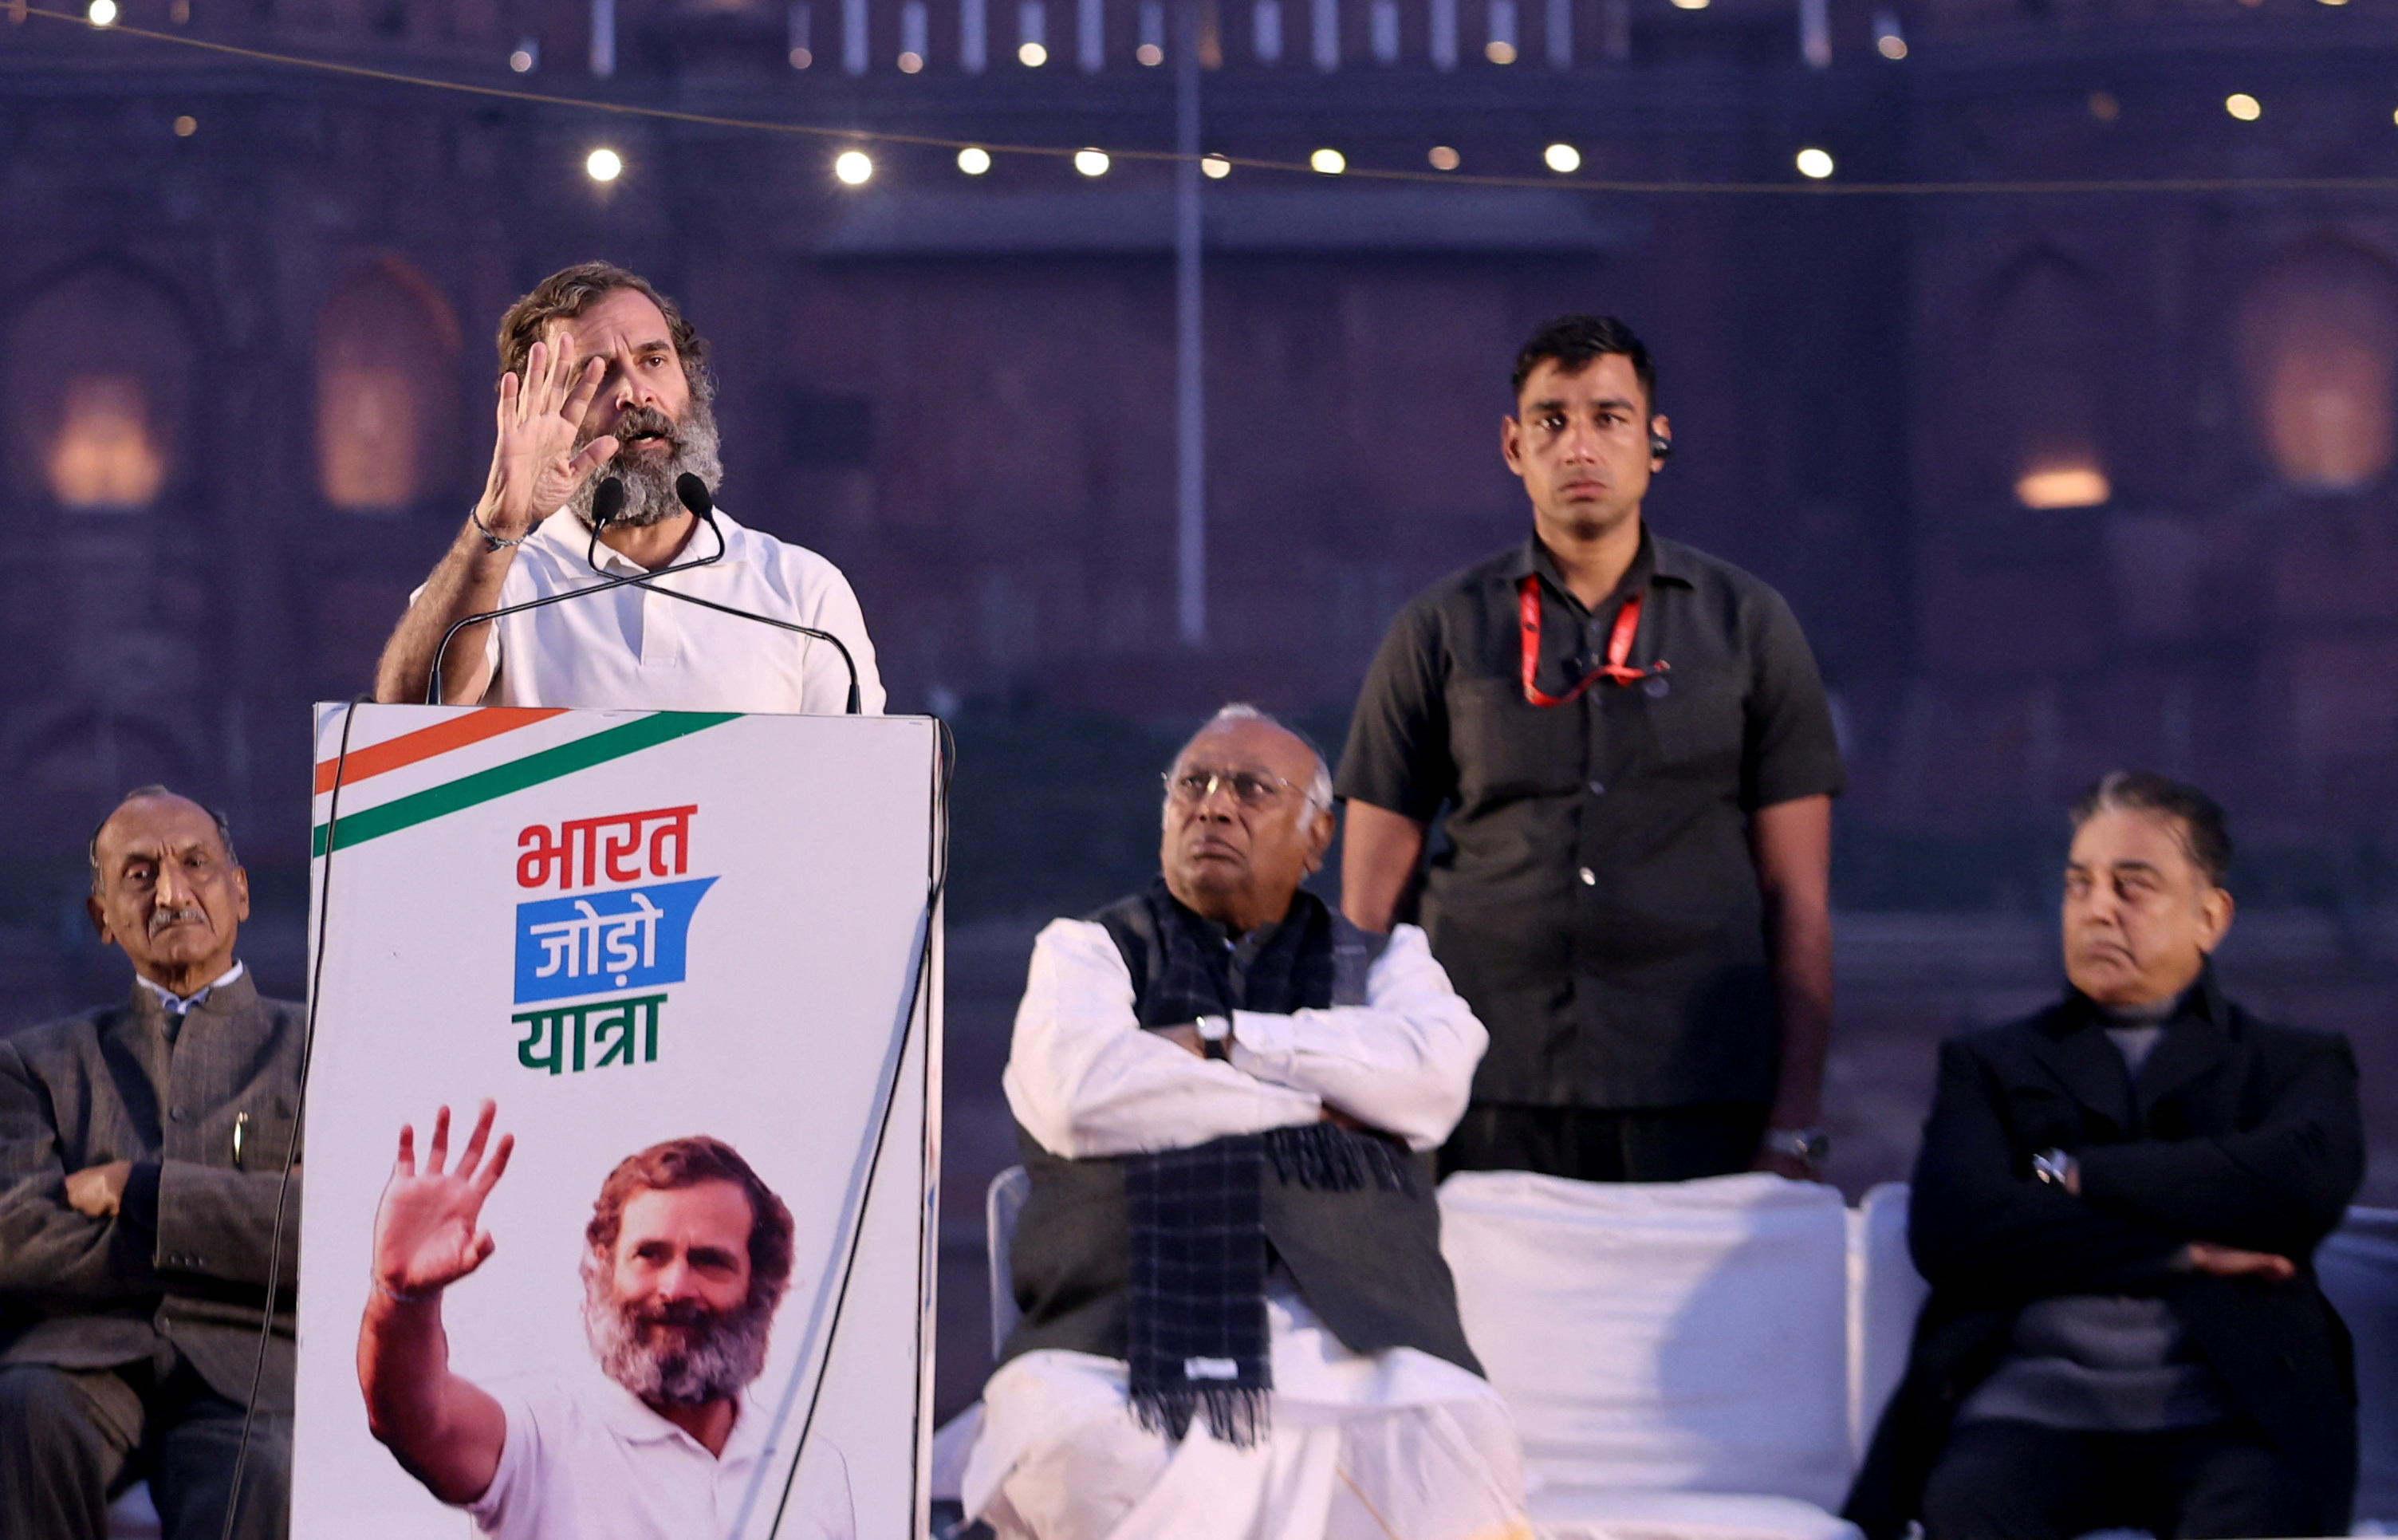 Congress Party leader Rahul Gandhi addresses the crowd during the ongoing Bharat Jodo Yatra